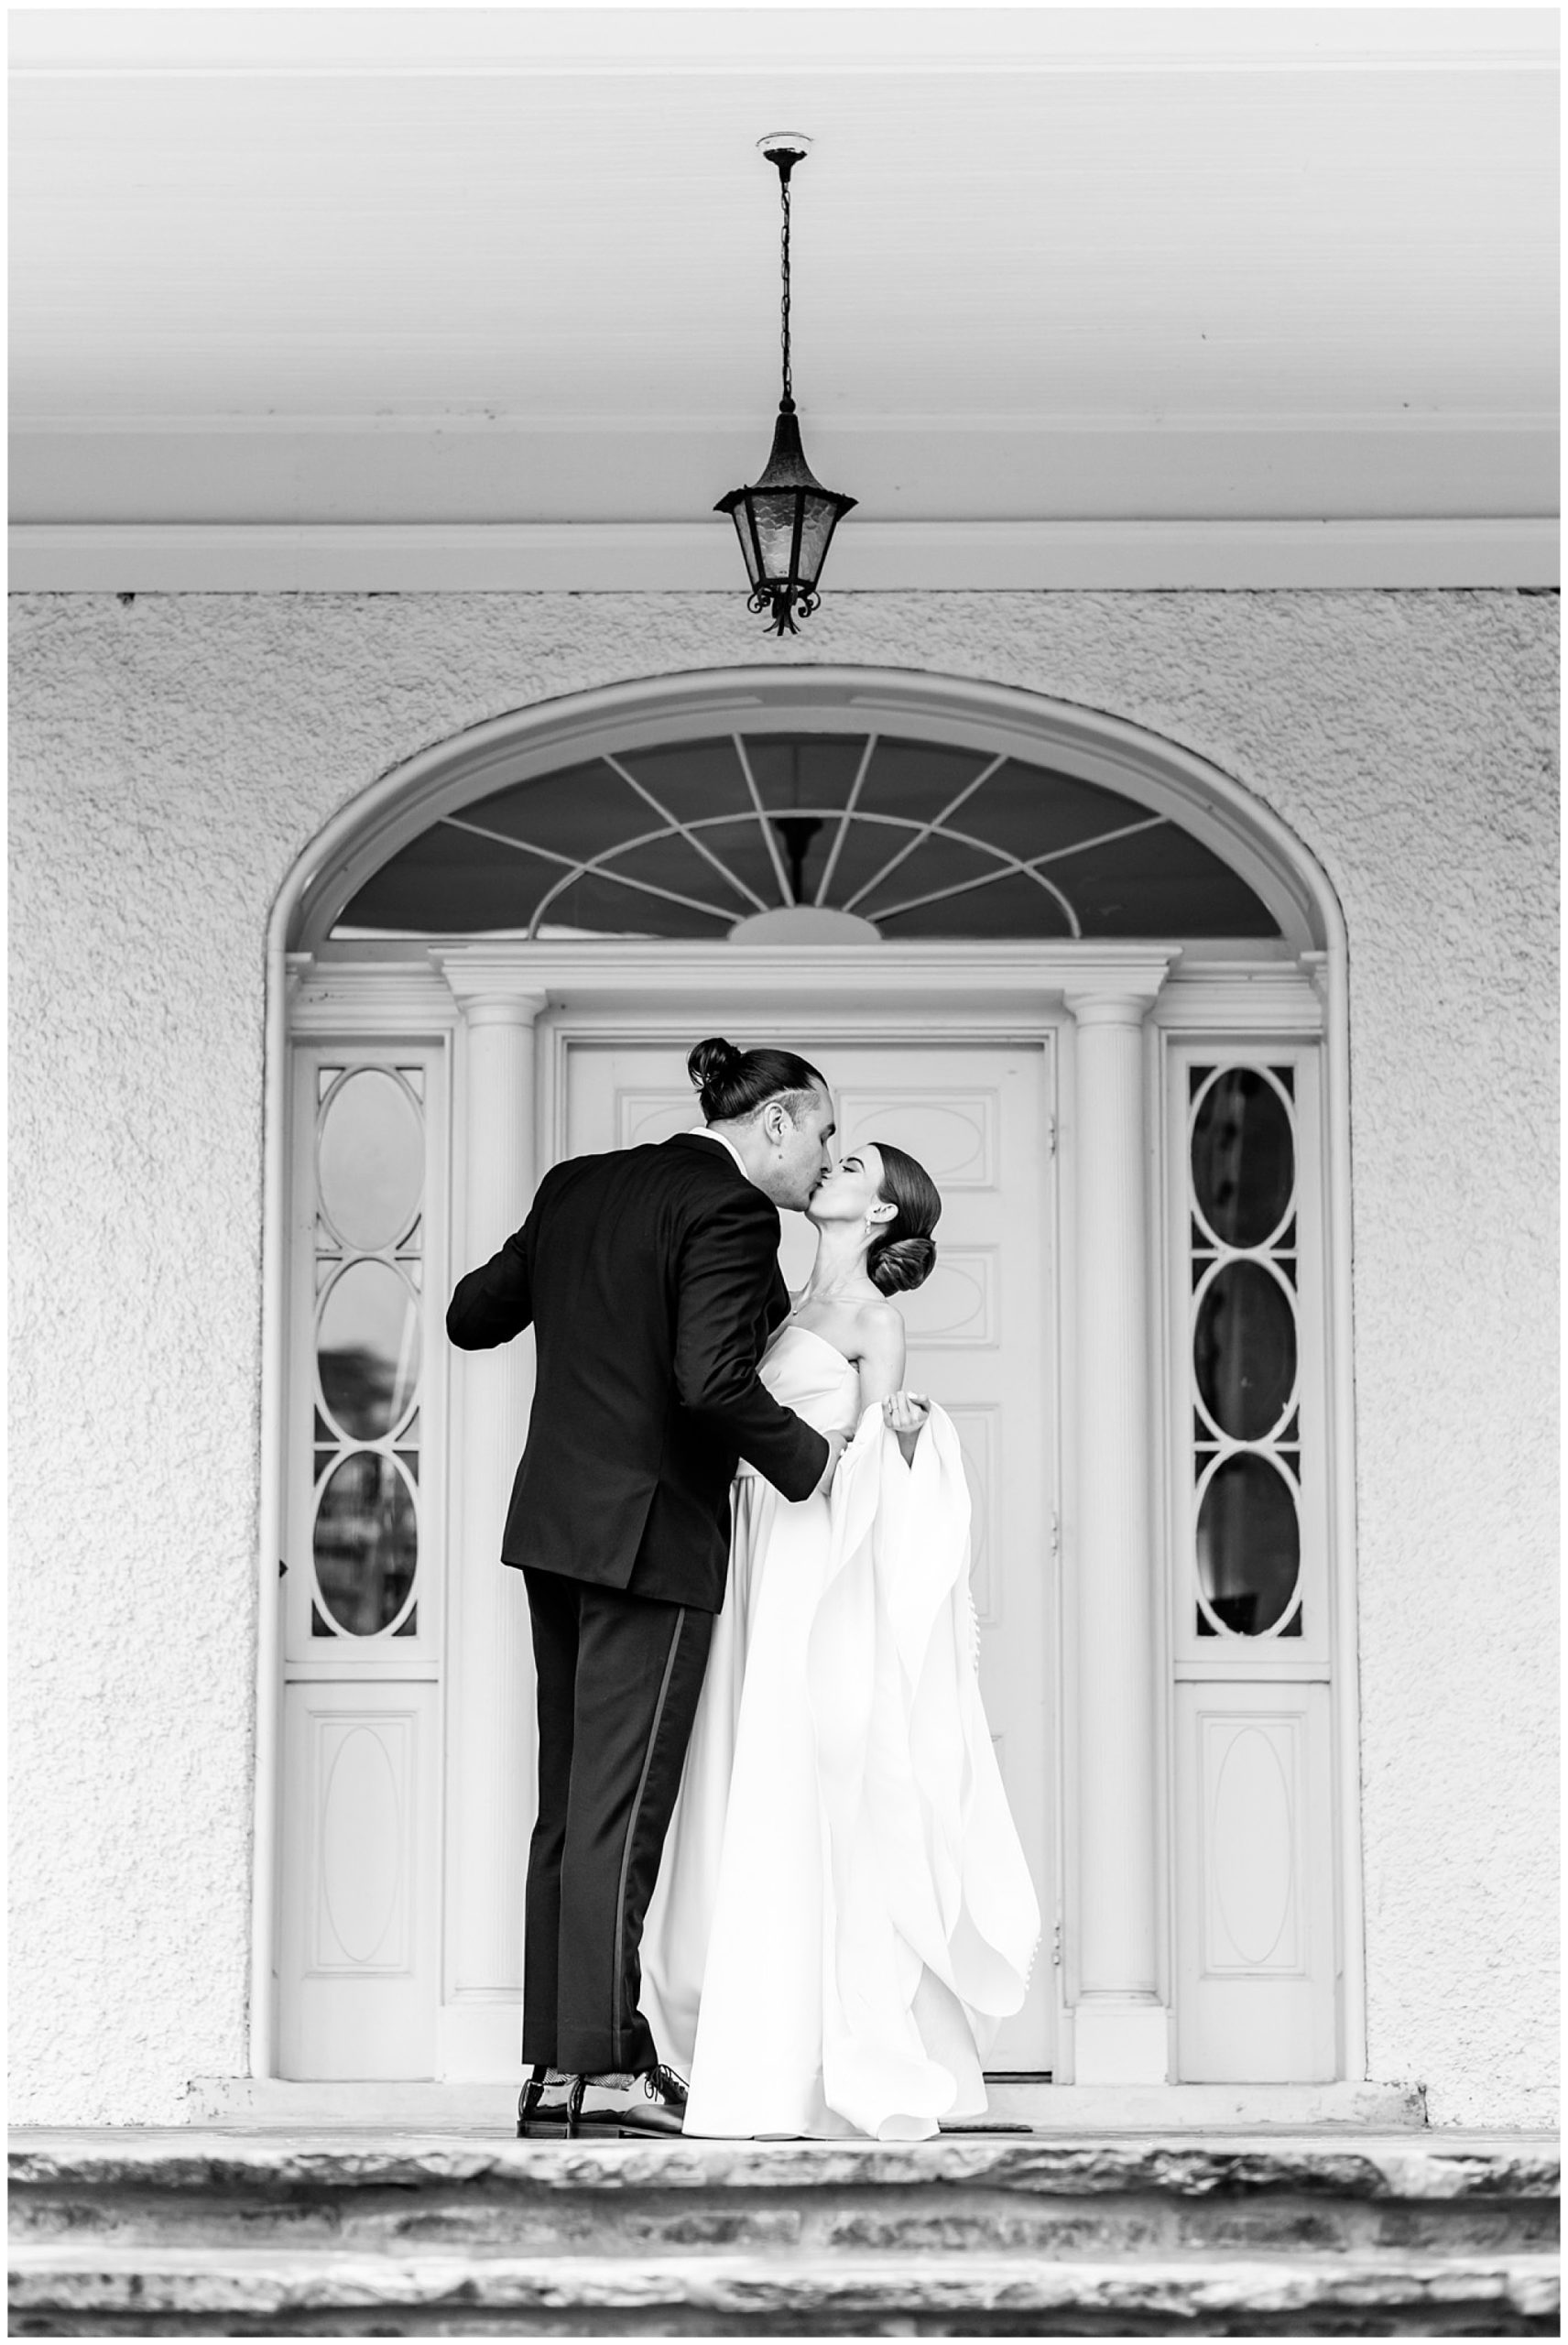 classic Rust Manor House wedding, sprig wedding, black and white aesthetic, classic wedding aesthetic, White Pumpkin Weddings City Tavern Club wedding, Leesburg wedding, Leesbur bride, manor house wedding, classic DC wedding, northern Virginia wedding venue, classic wedding venue, Washington DC wedding photographer, Rachel E.H. Photography, black and white, bride and groom kissing on porch, The Black Tux